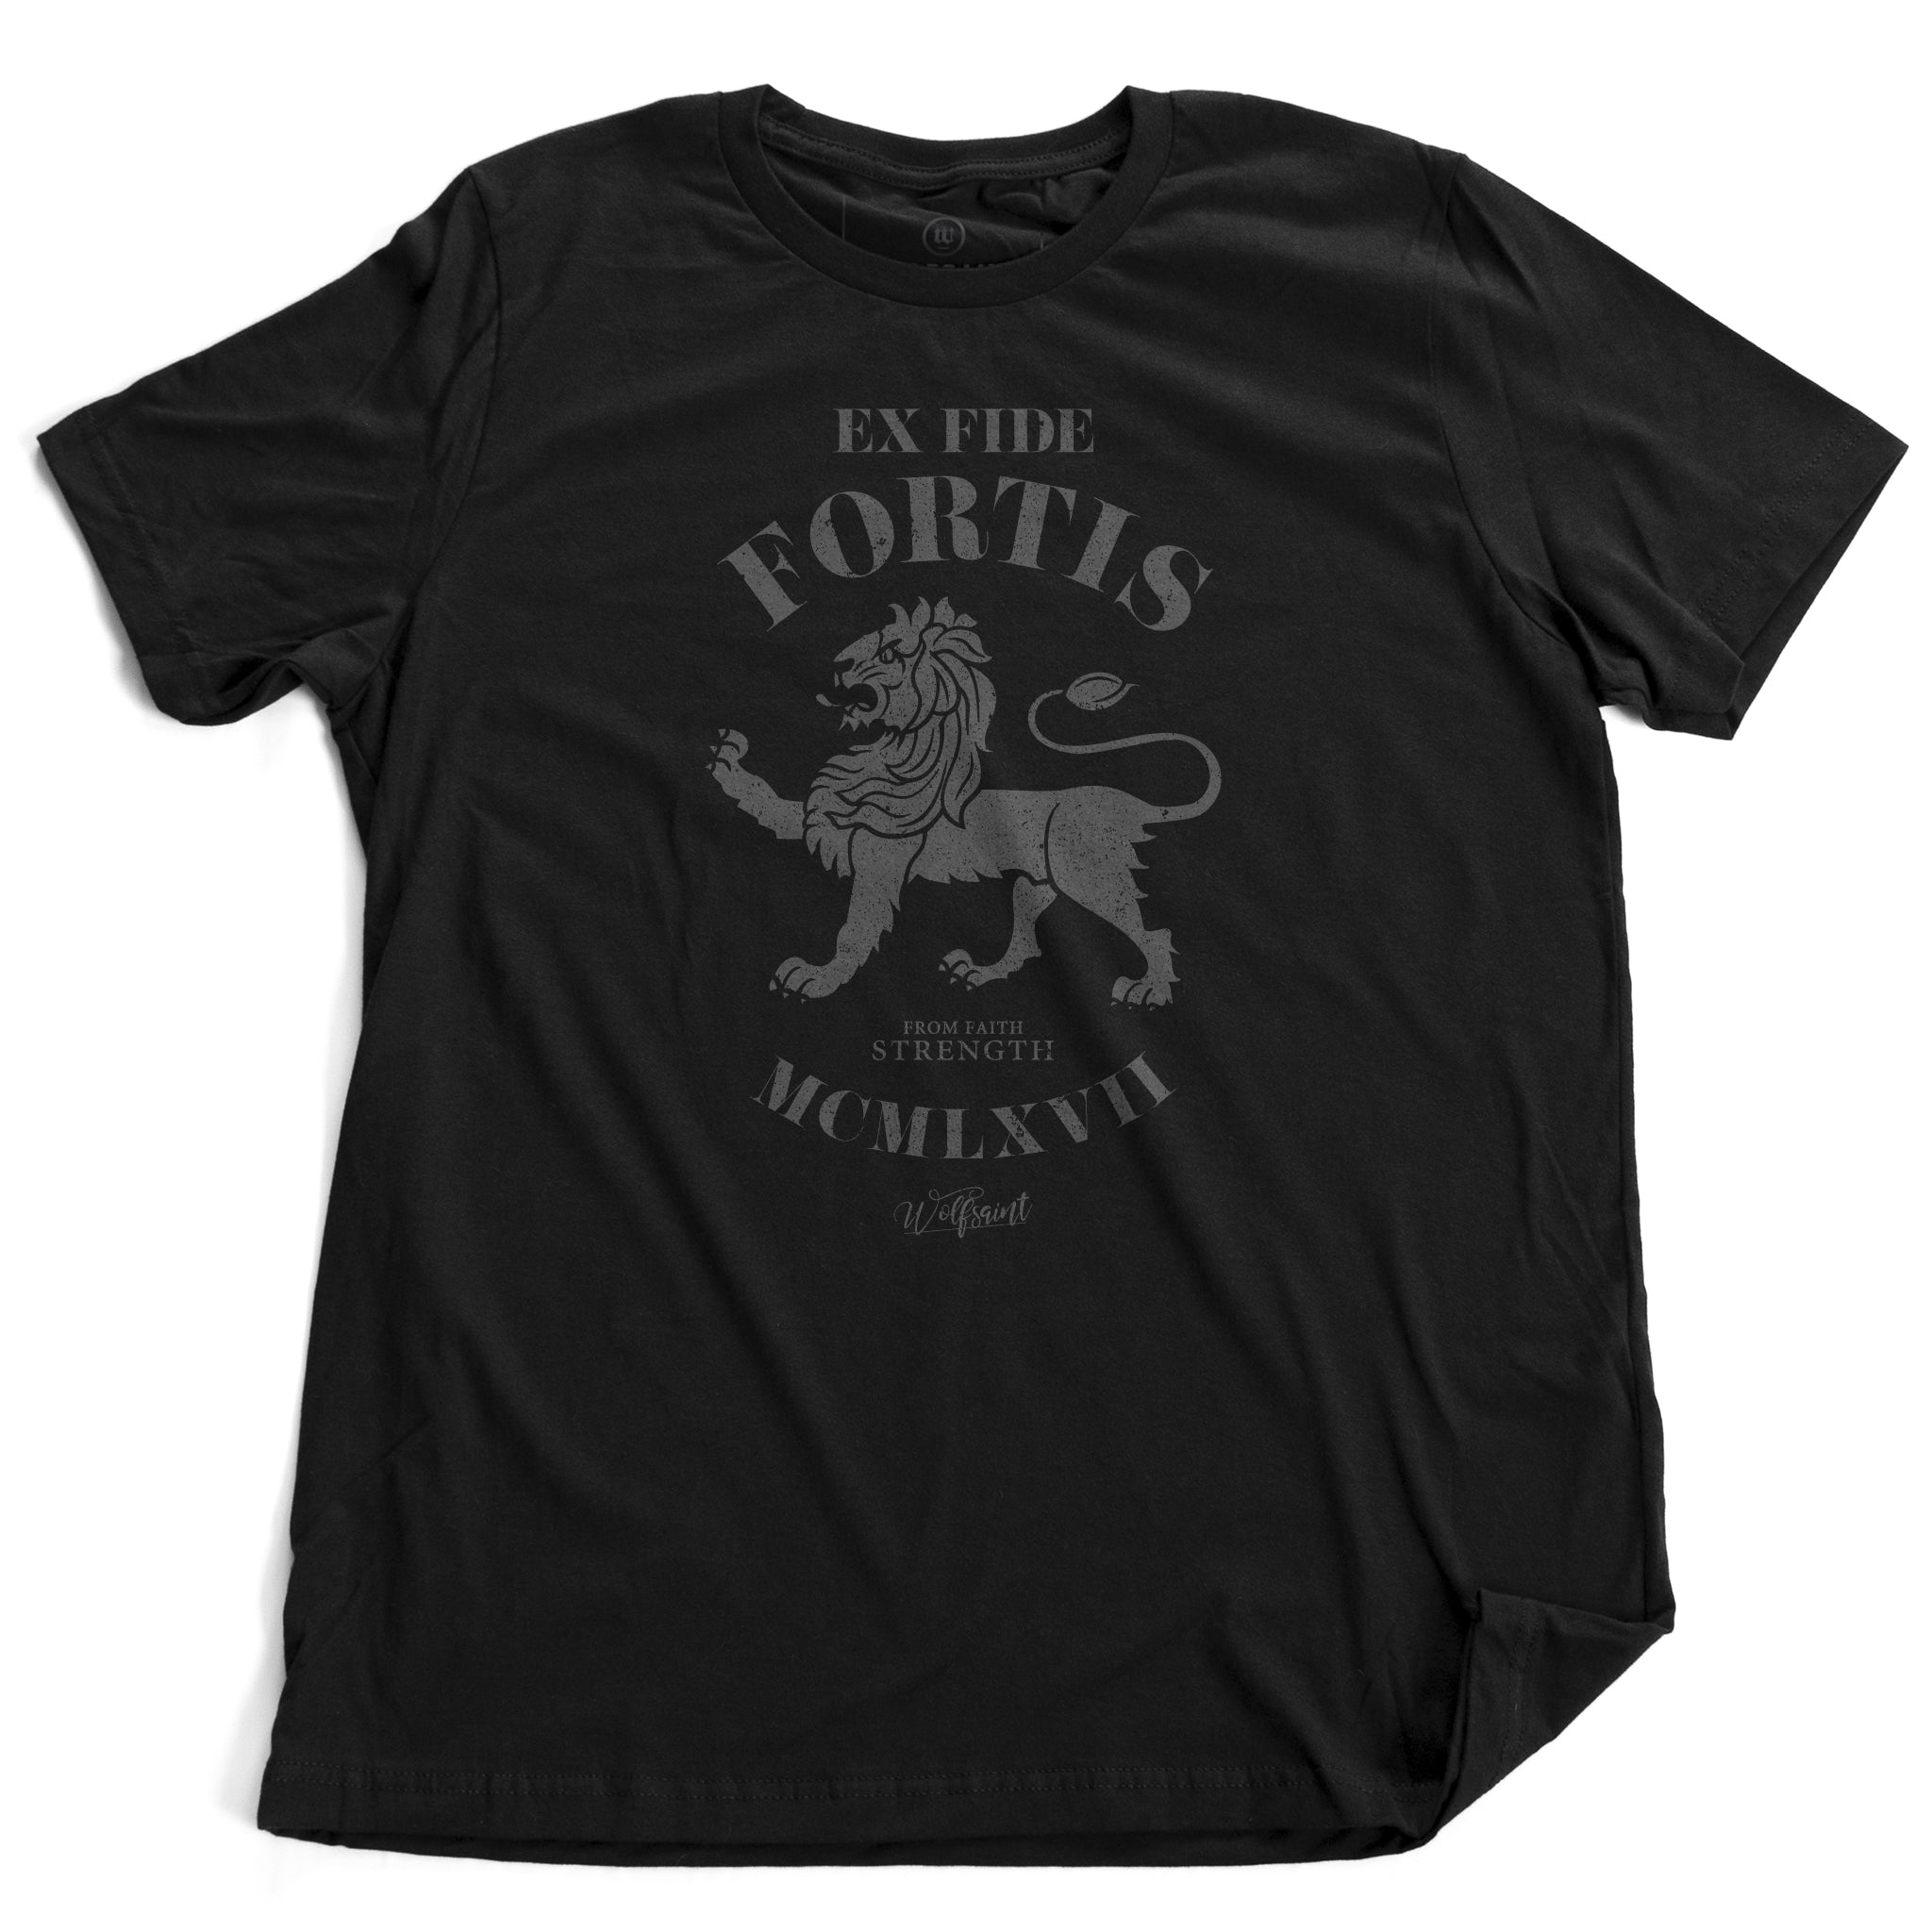 A vintage-inspired classic black retro t-shirt featuring a strong graphic of a lion, with the Latin phrase meaning “Out of faith, strength.” By wolfsaint.net